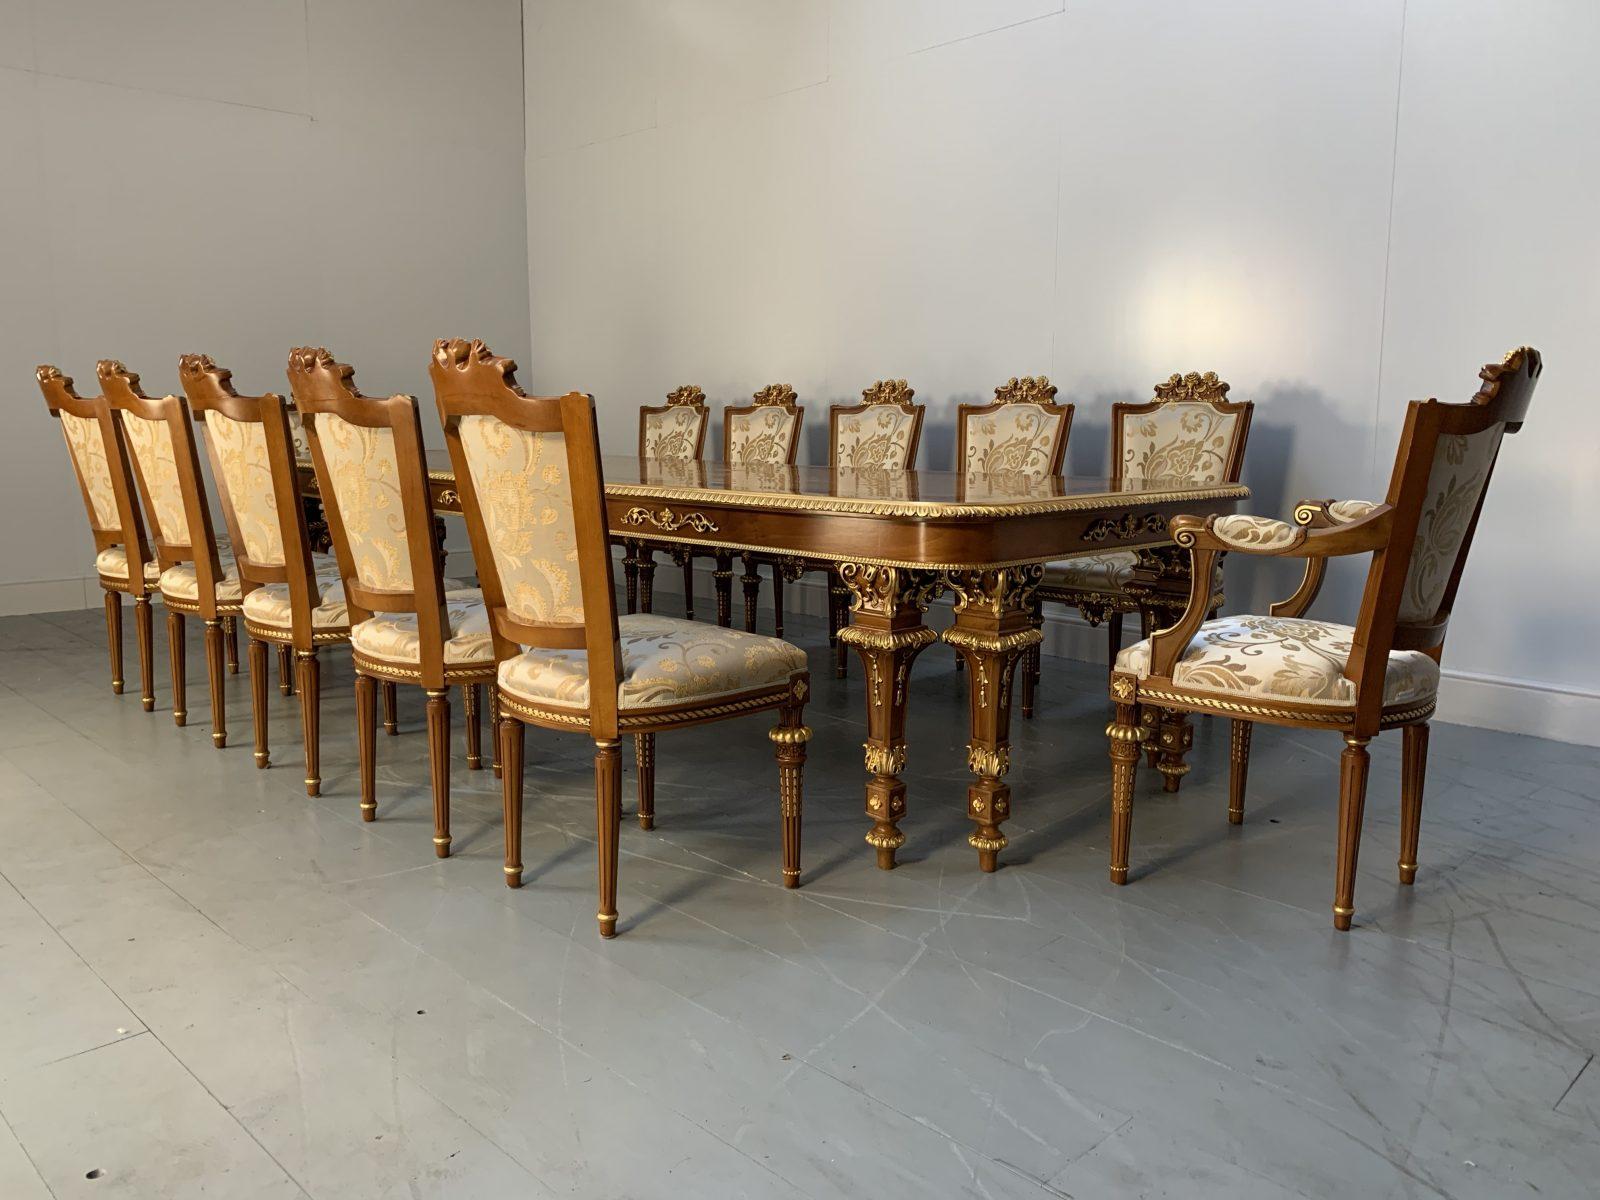 Asnaghi “Eubea” Dining Table and 12 Chair Suite in Harwood, Gilt and Silk  For Sale at 1stDibs